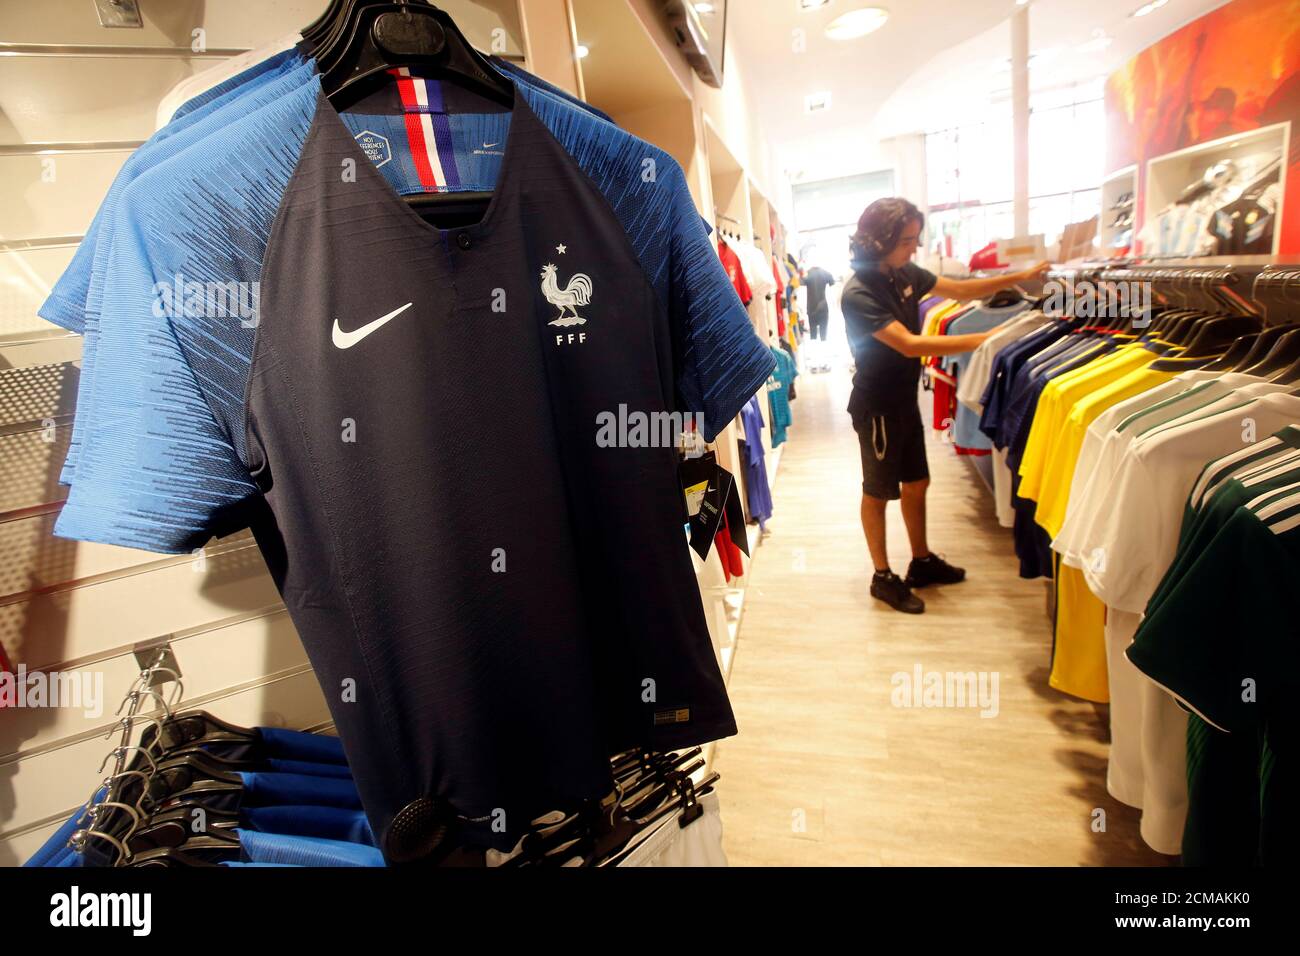 France team soccer jerseys are displayed in a sporting goods store in  Marseille, France, June 8, 2018. French soccer has won one world contest  before its players even fly to Russia for